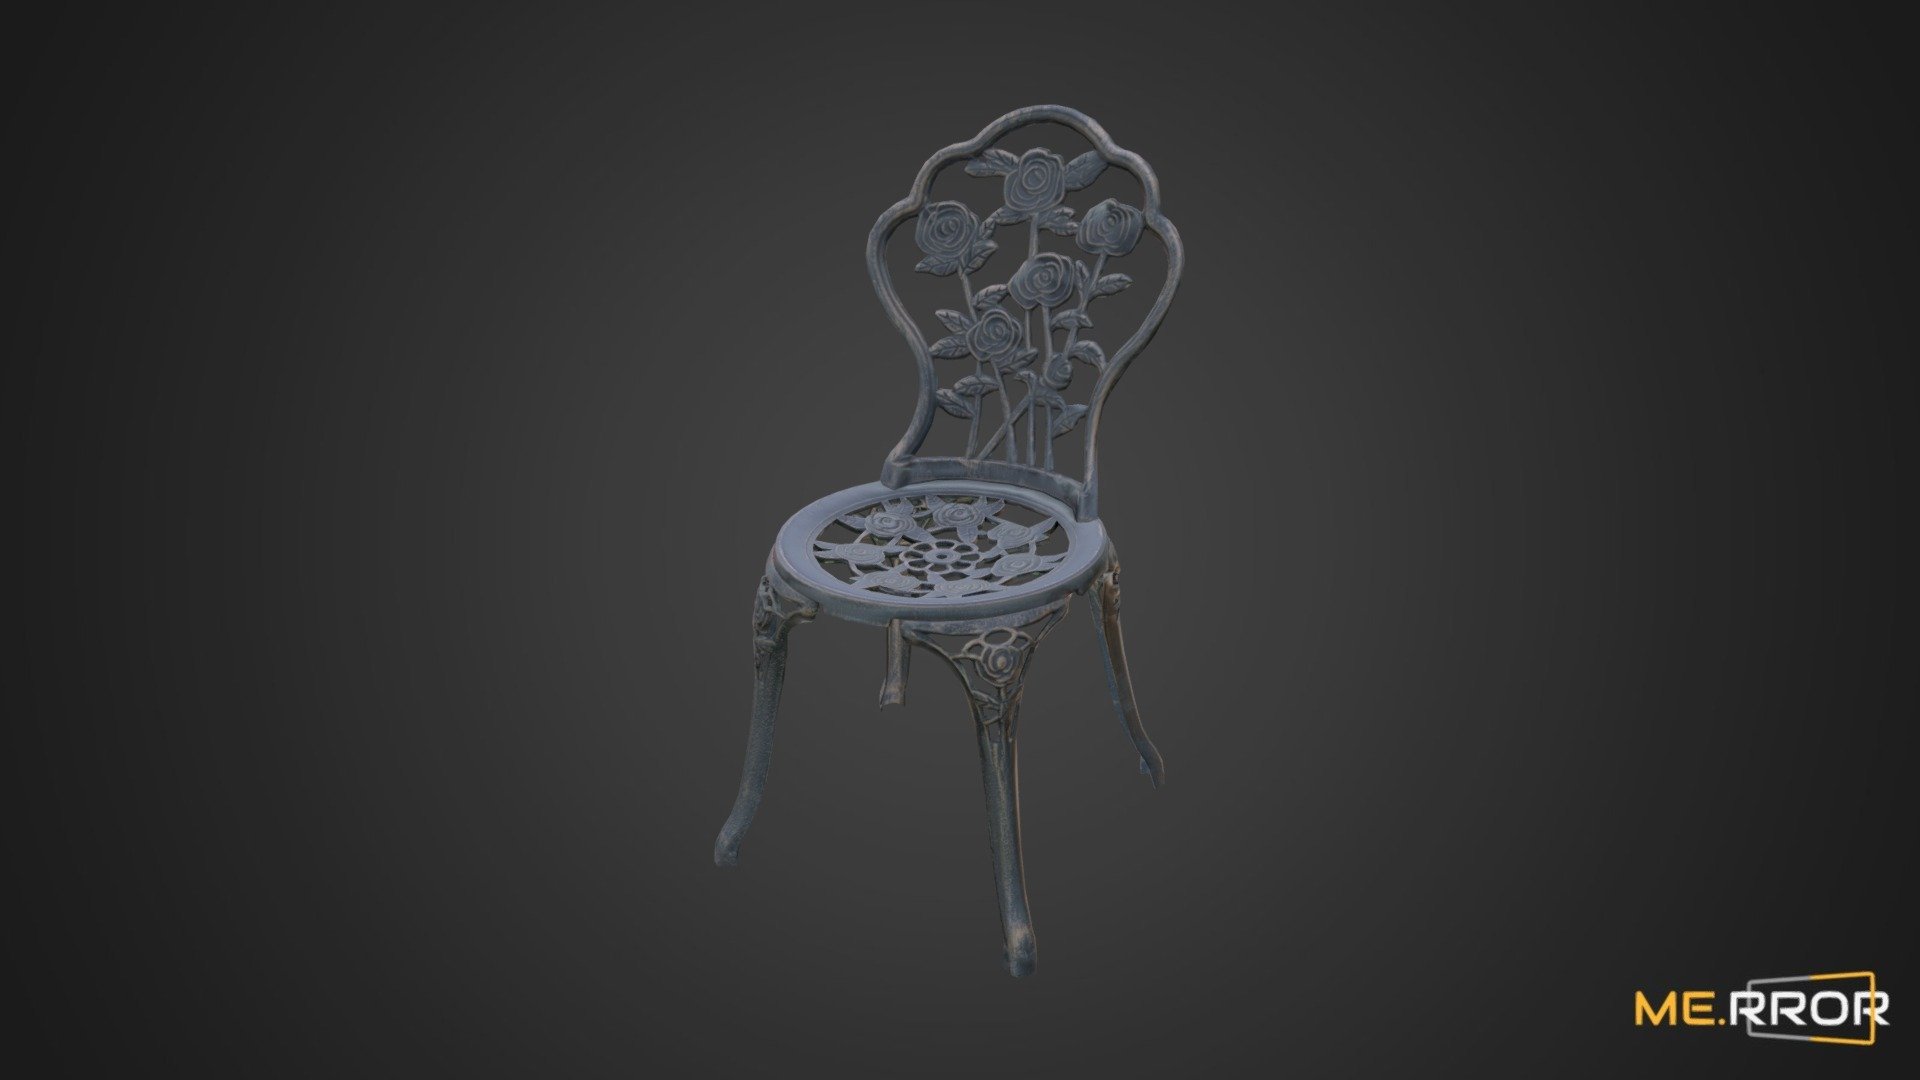 MERROR is a 3D Content PLATFORM which introduces various Asian assets to the 3D world


3DScanning #Photogrametry #ME.RROR - [Game-Ready] Steel Chair 1 - Buy Royalty Free 3D model by ME.RROR Studio (@merror) 3d model